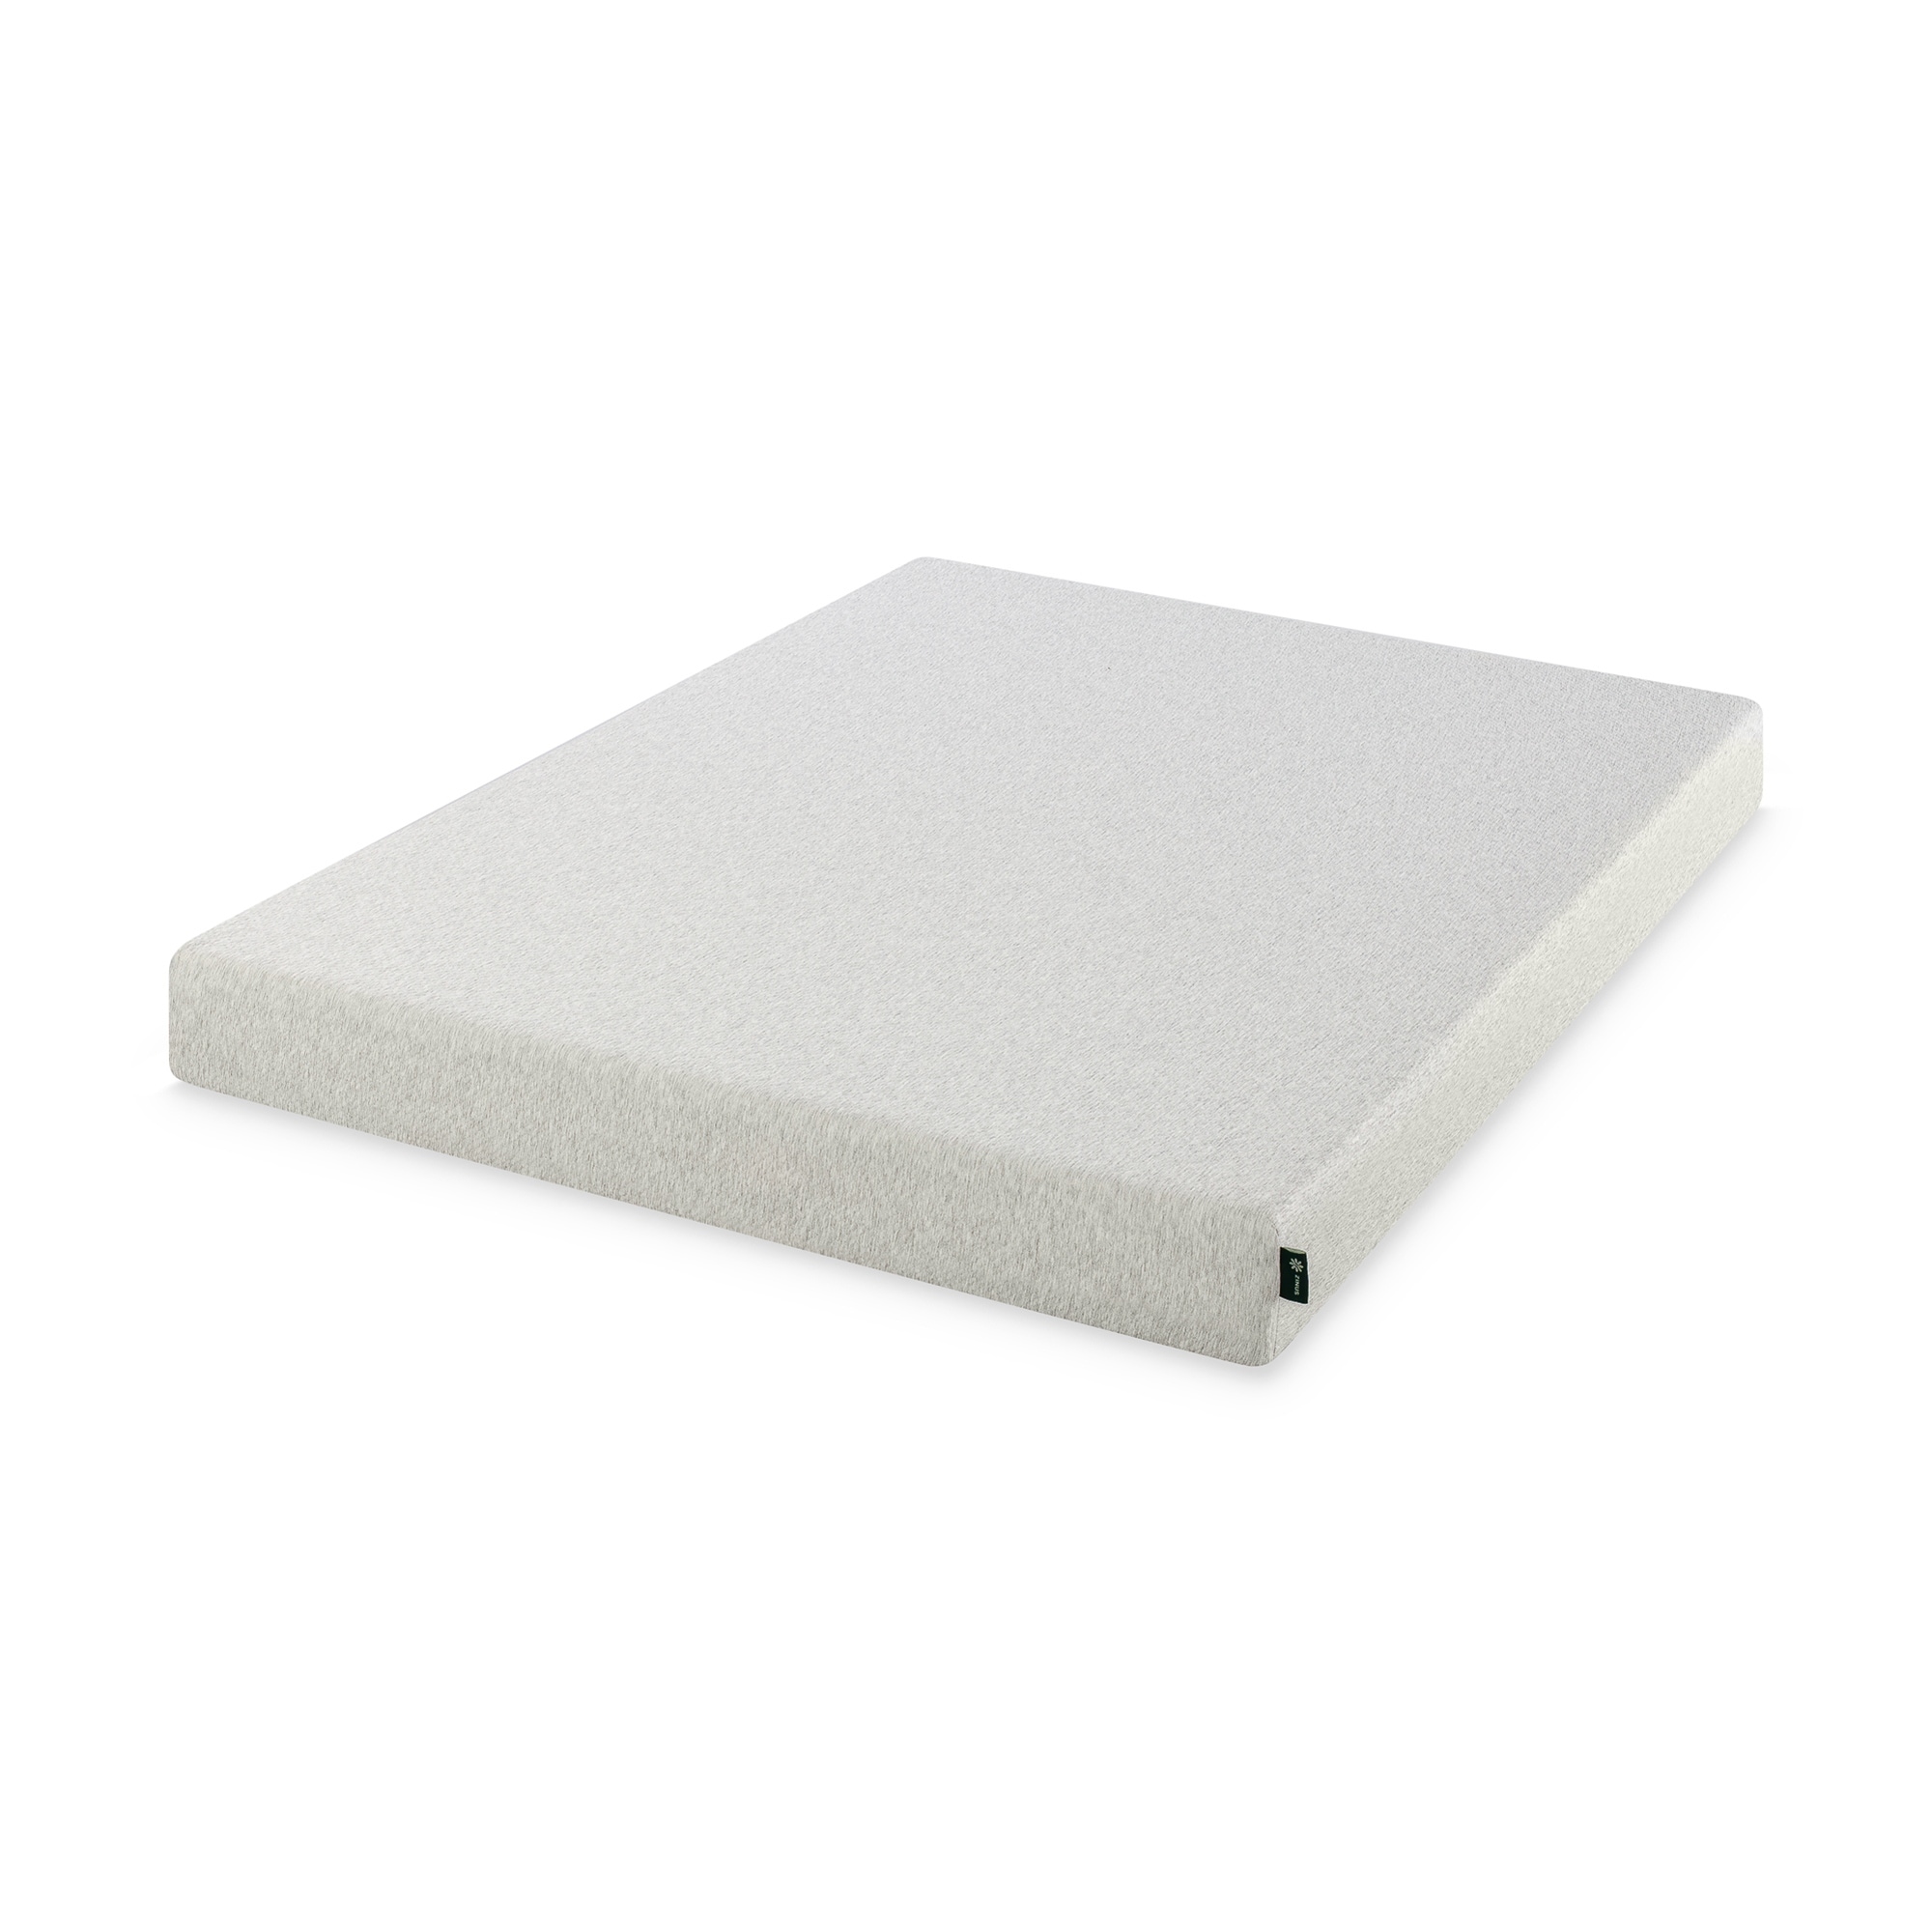 Pressure Relieving Details about   ZINUS 6 Inch Ultima Memory Foam Mattress CertiPUR-US Cer 